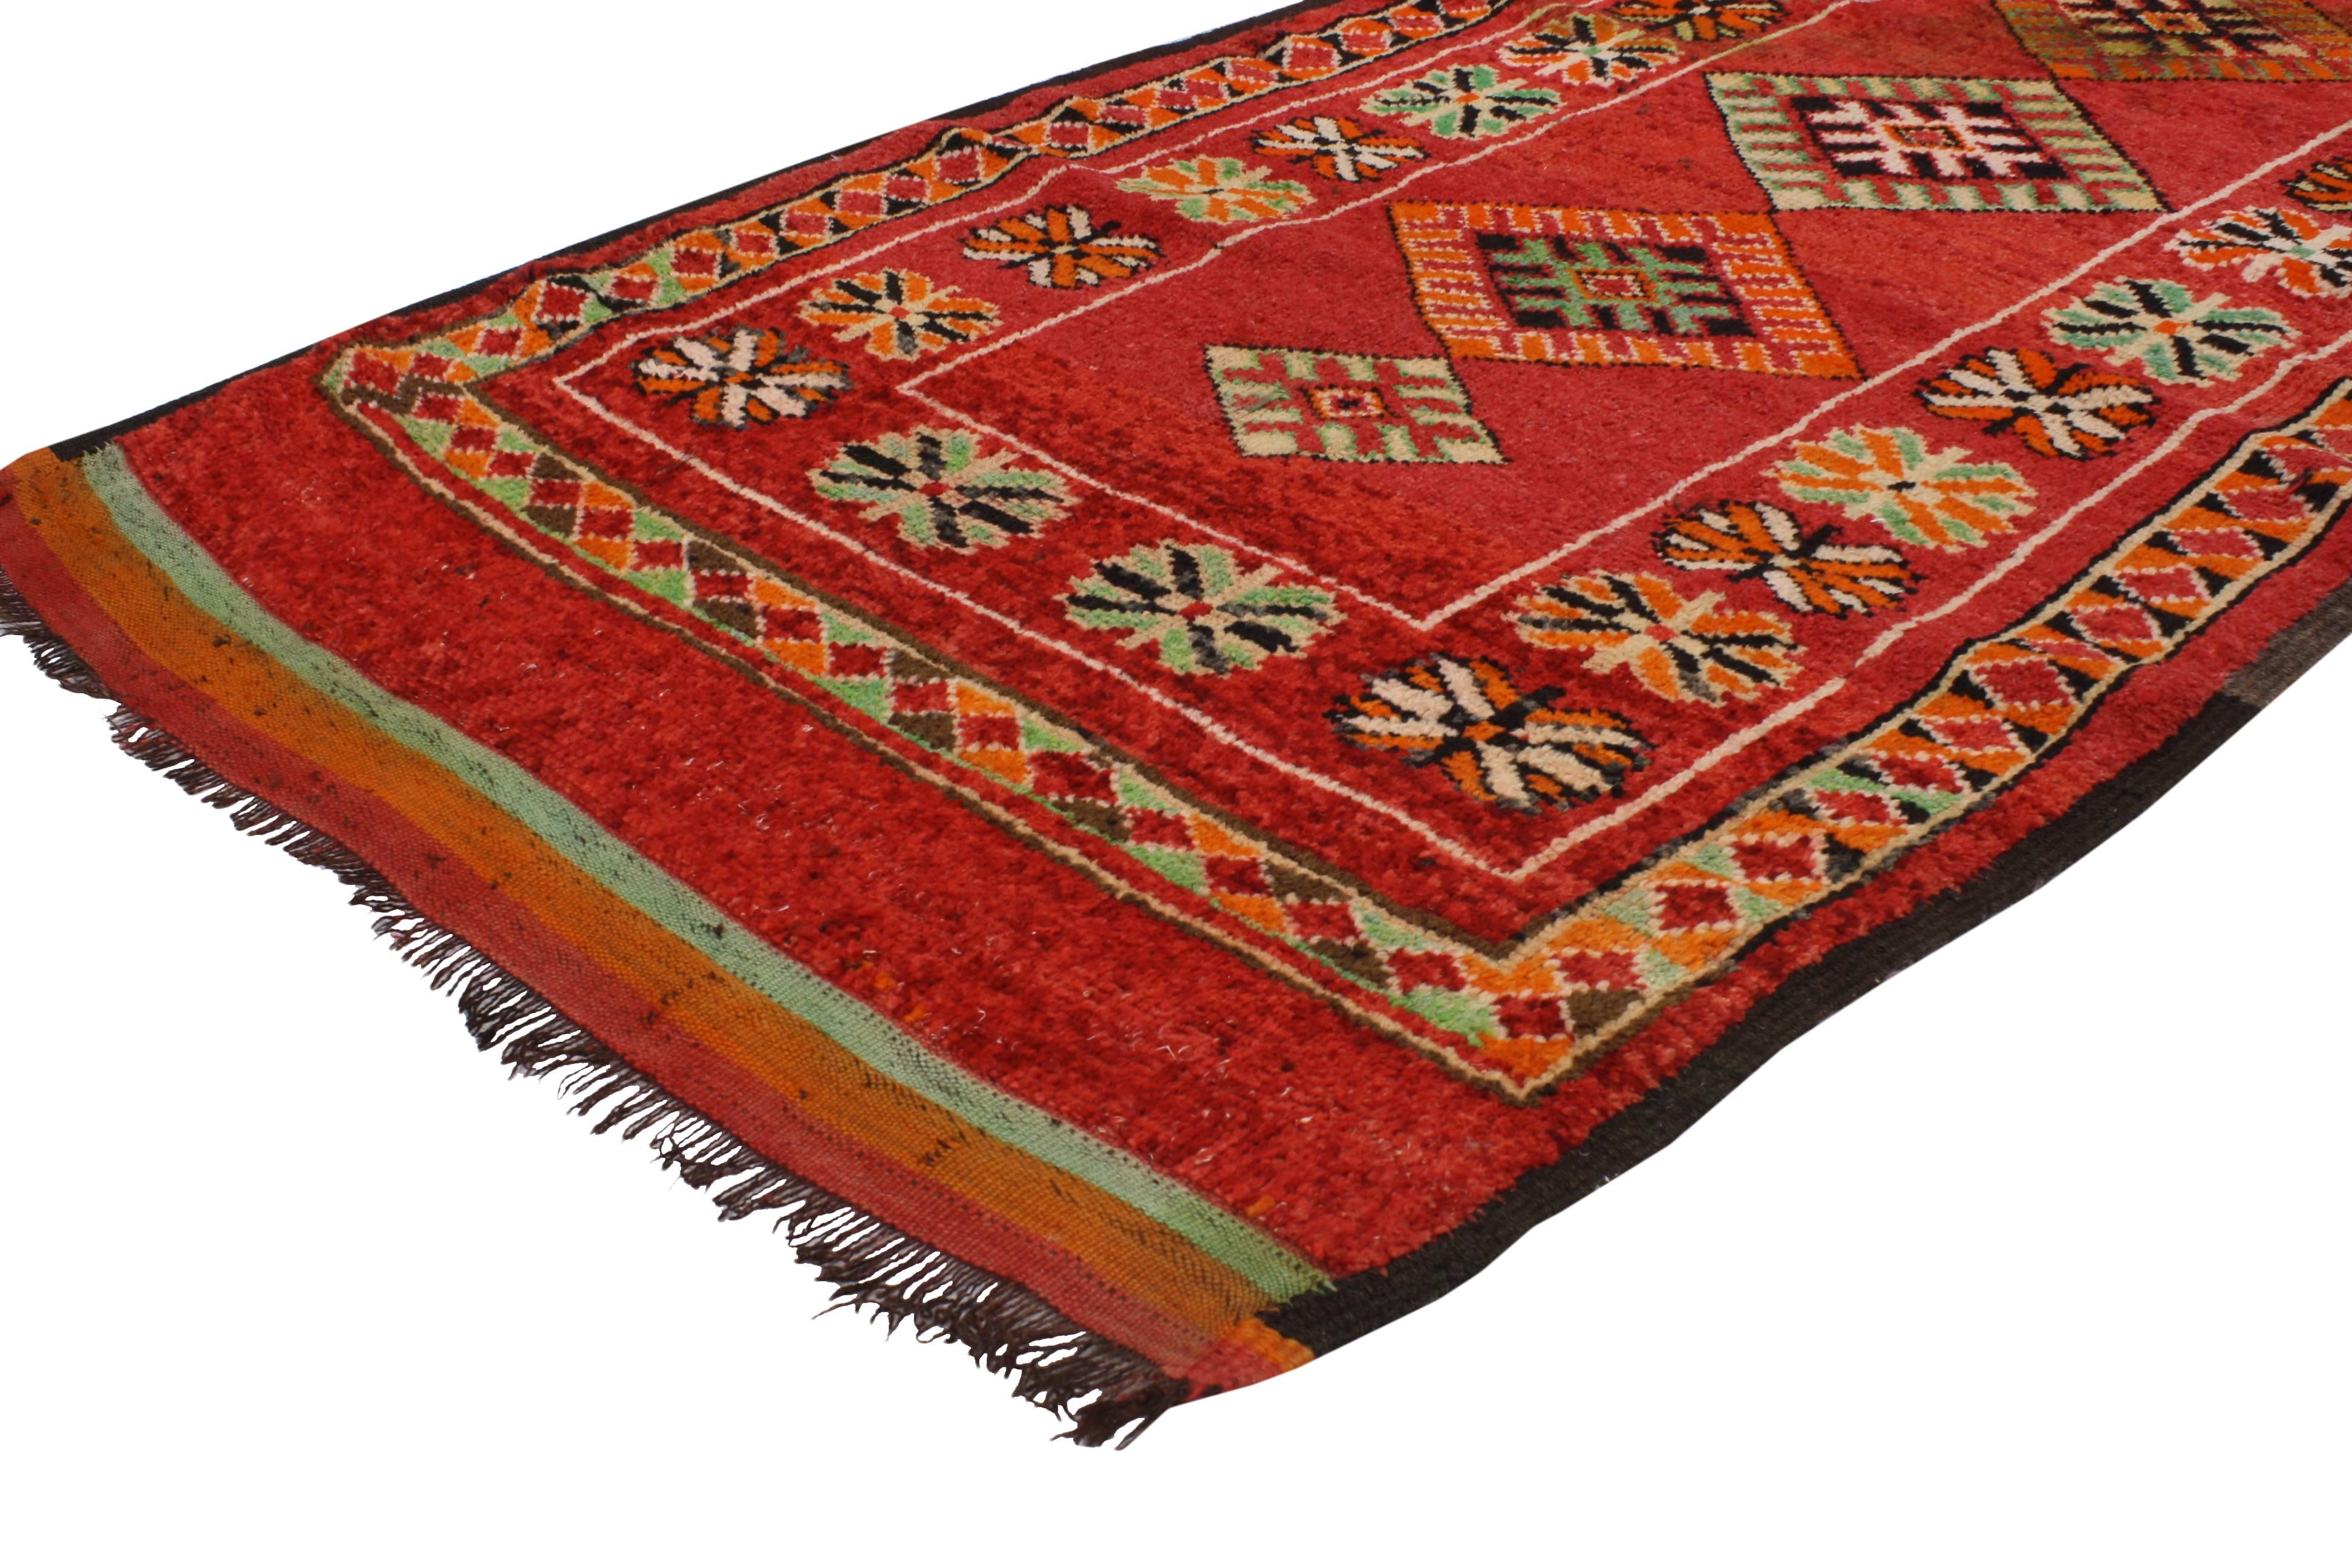 Impeccably woven from hand-knotted wool and displaying a modern tribal style, this vintage Berber Moroccan red rug features four stacked diamonds surrounded by geometric motifs in an abrashed red field. Blending the graphic appeal and Folk Art